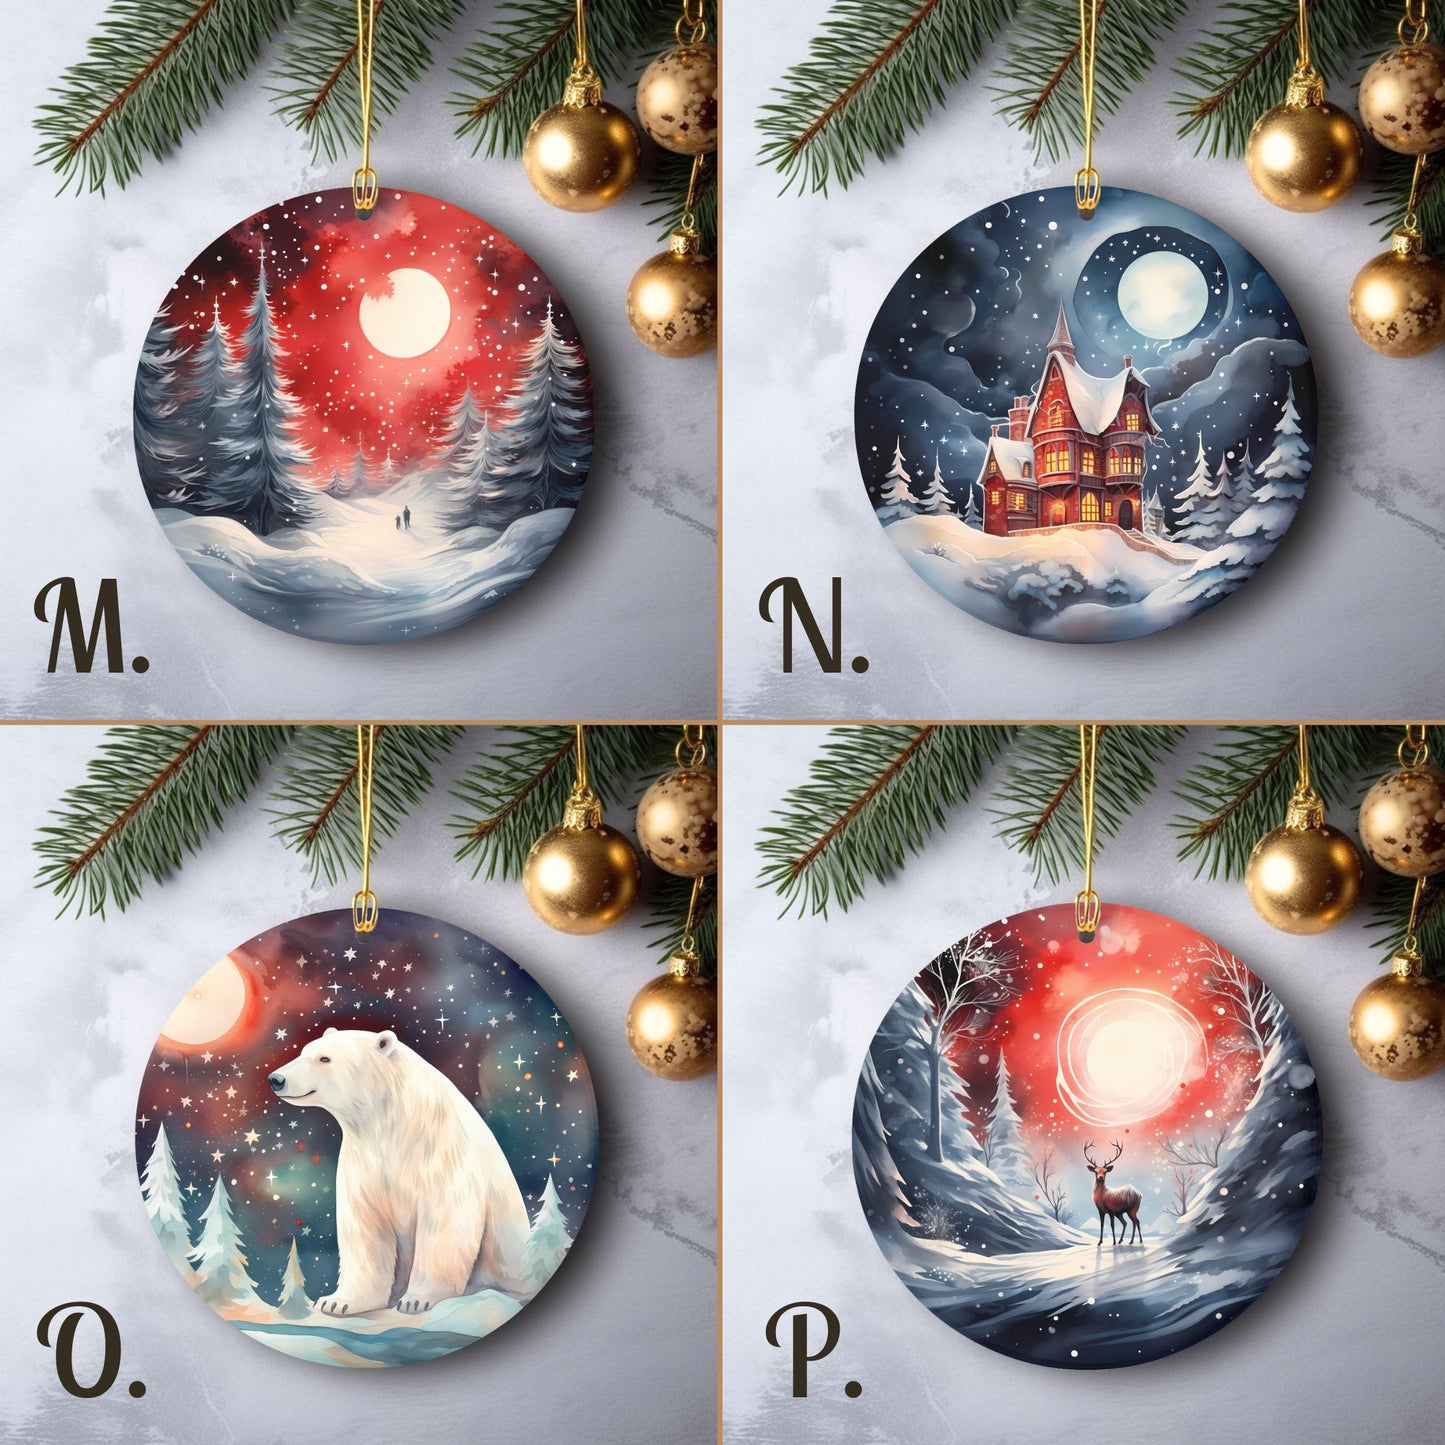 Watercolor Christmas Ornaments Set of 20 Round Ceramic Ornaments with Vivid Classic Xmas Designs Festive Christmas Tree Decoration